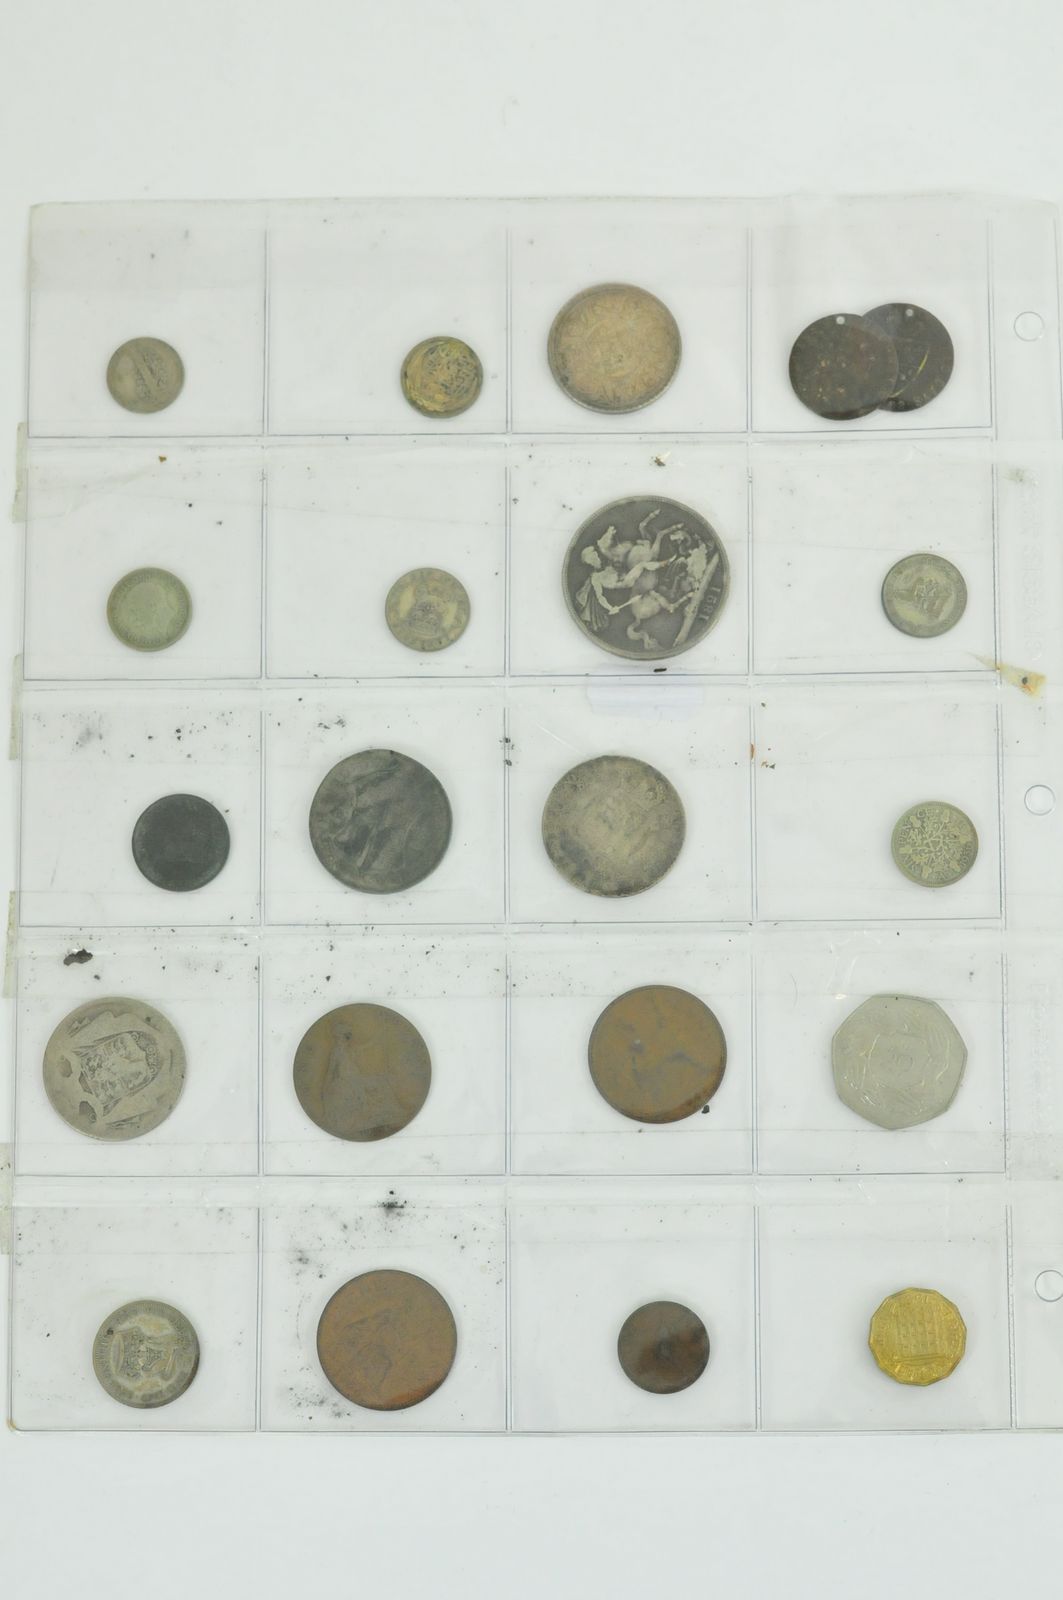 A plastic sheet of various coins including George IIII silver crown, 1918 one rupee coin, and